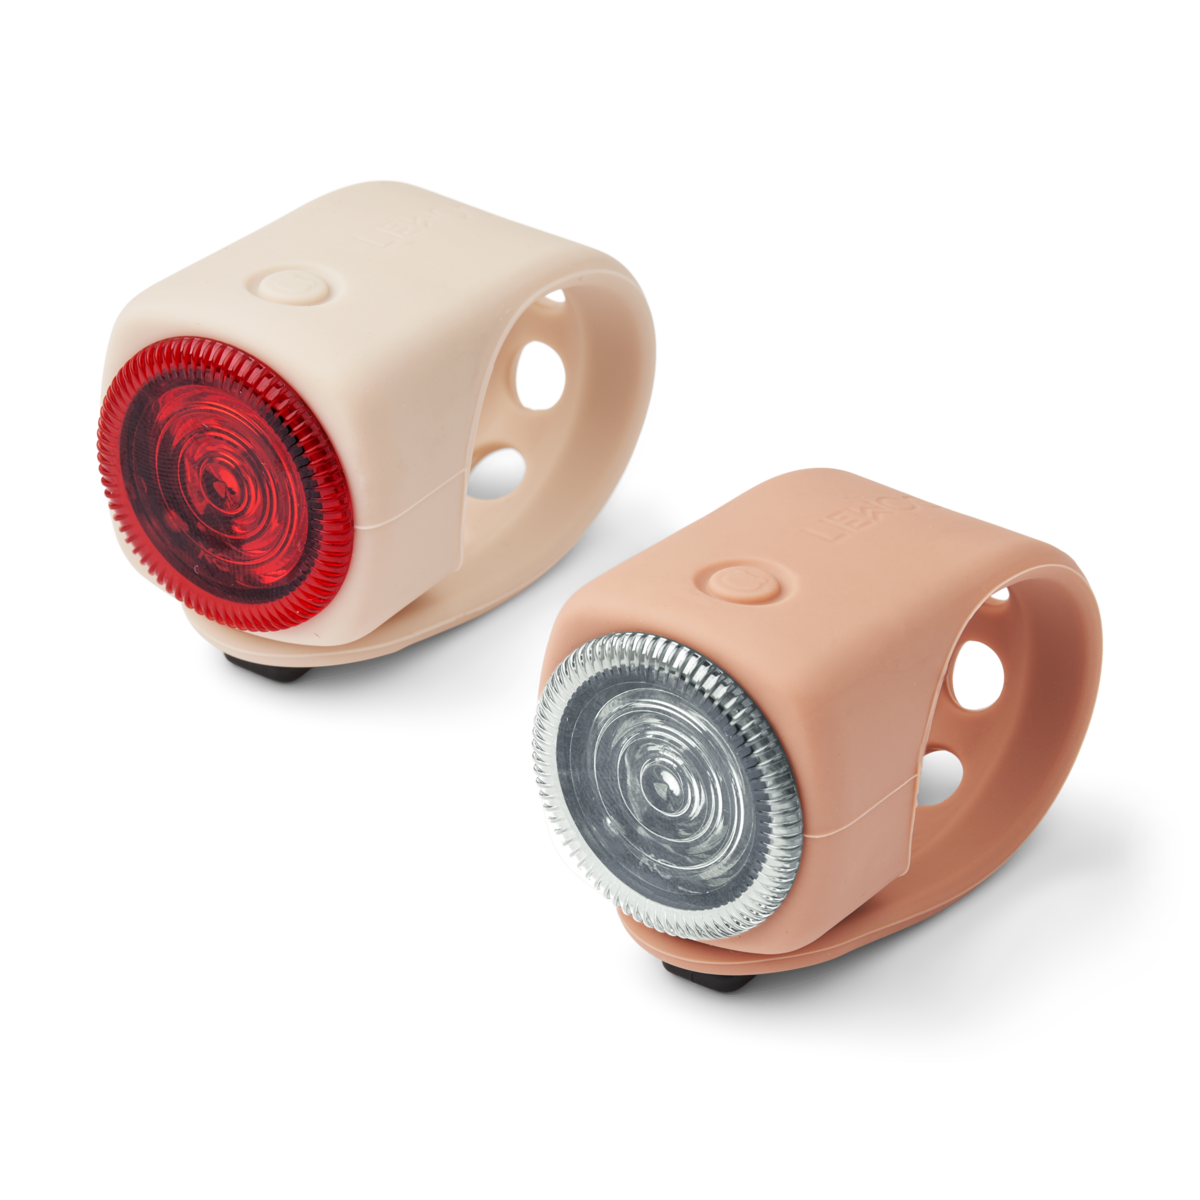 Liewood Liewood Rolf Bike Light 2-Pack - Tuscany rose / Apple blossom - Decomusy